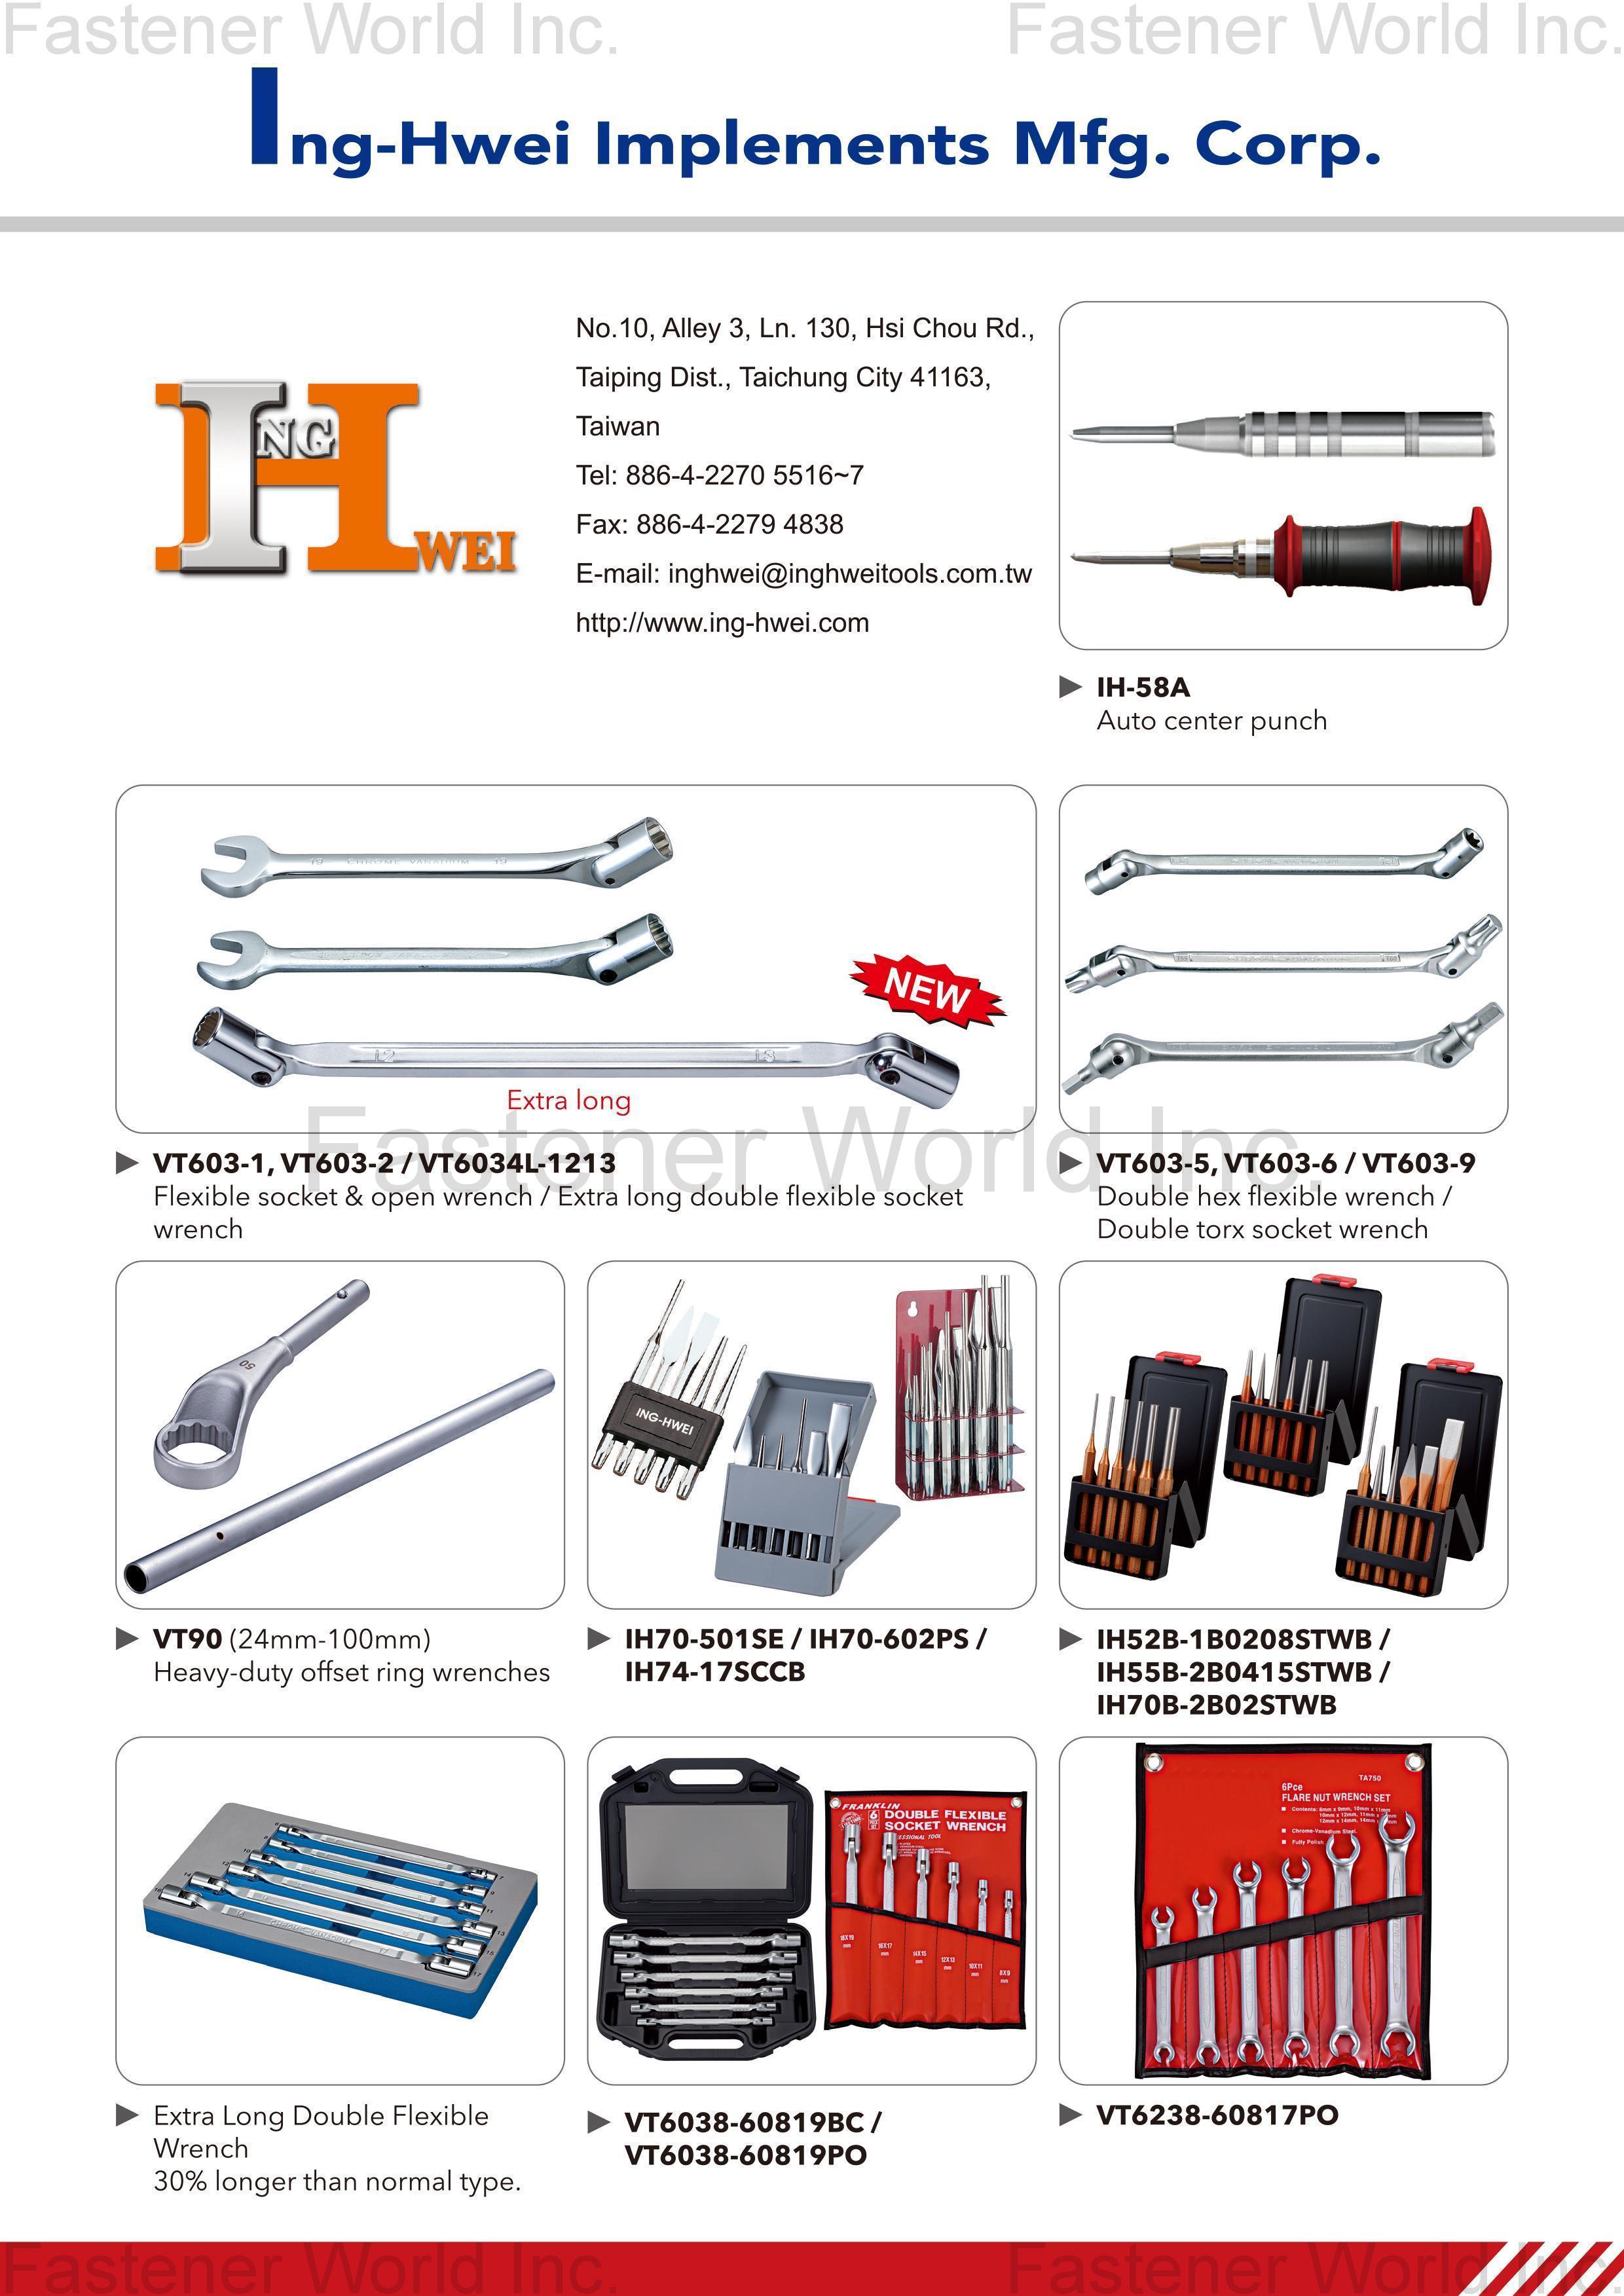 Socket Wrench Sets & Sockets Auto Center Punch, Flexible Socket & Open Wench, Extra Long Double Flexible Socket Wrench, Double Hex Flexible Wrench, Double Torx Socket Wrench, Heavy-duty offset ring wrenches, Extra Long Double Flexible Wrench